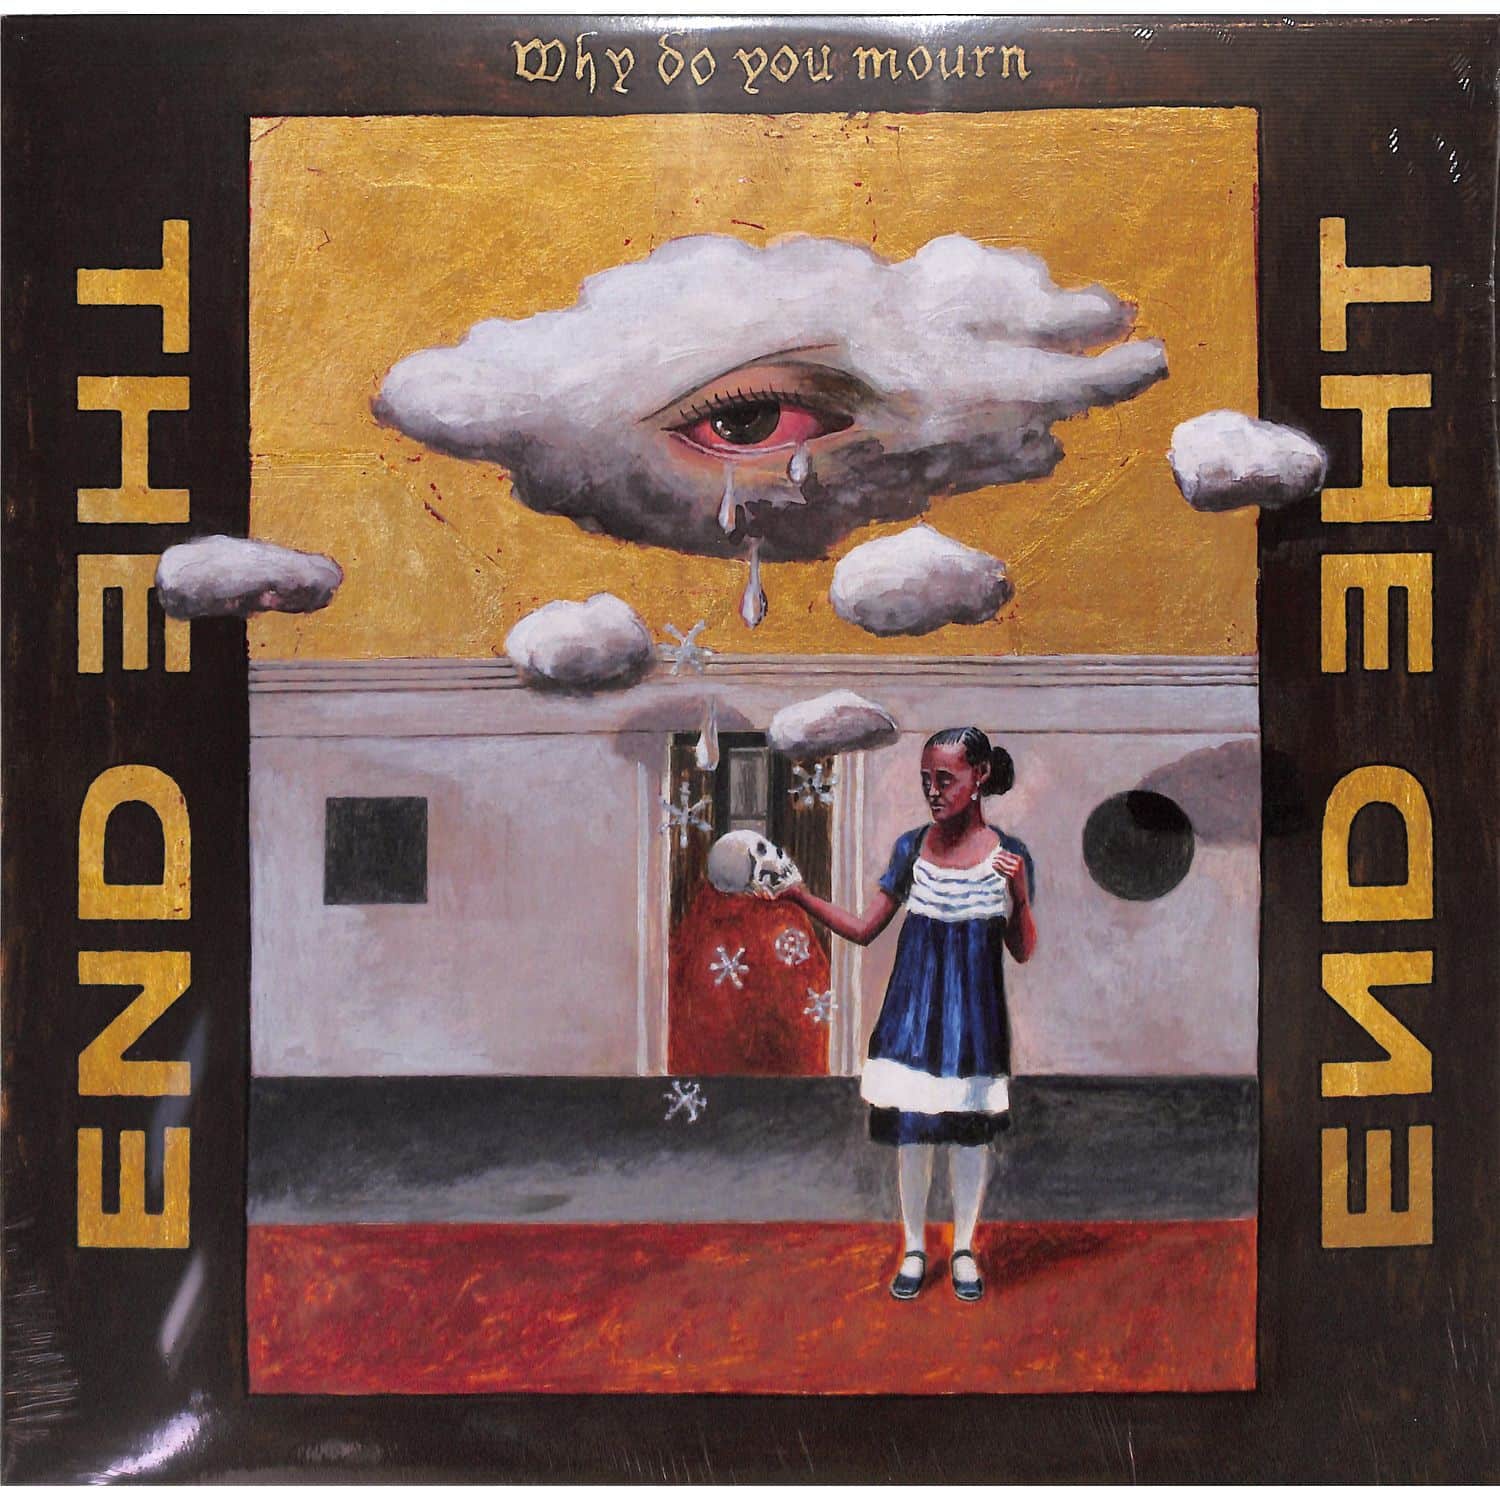 The End - WHY DO YOU MOURN 